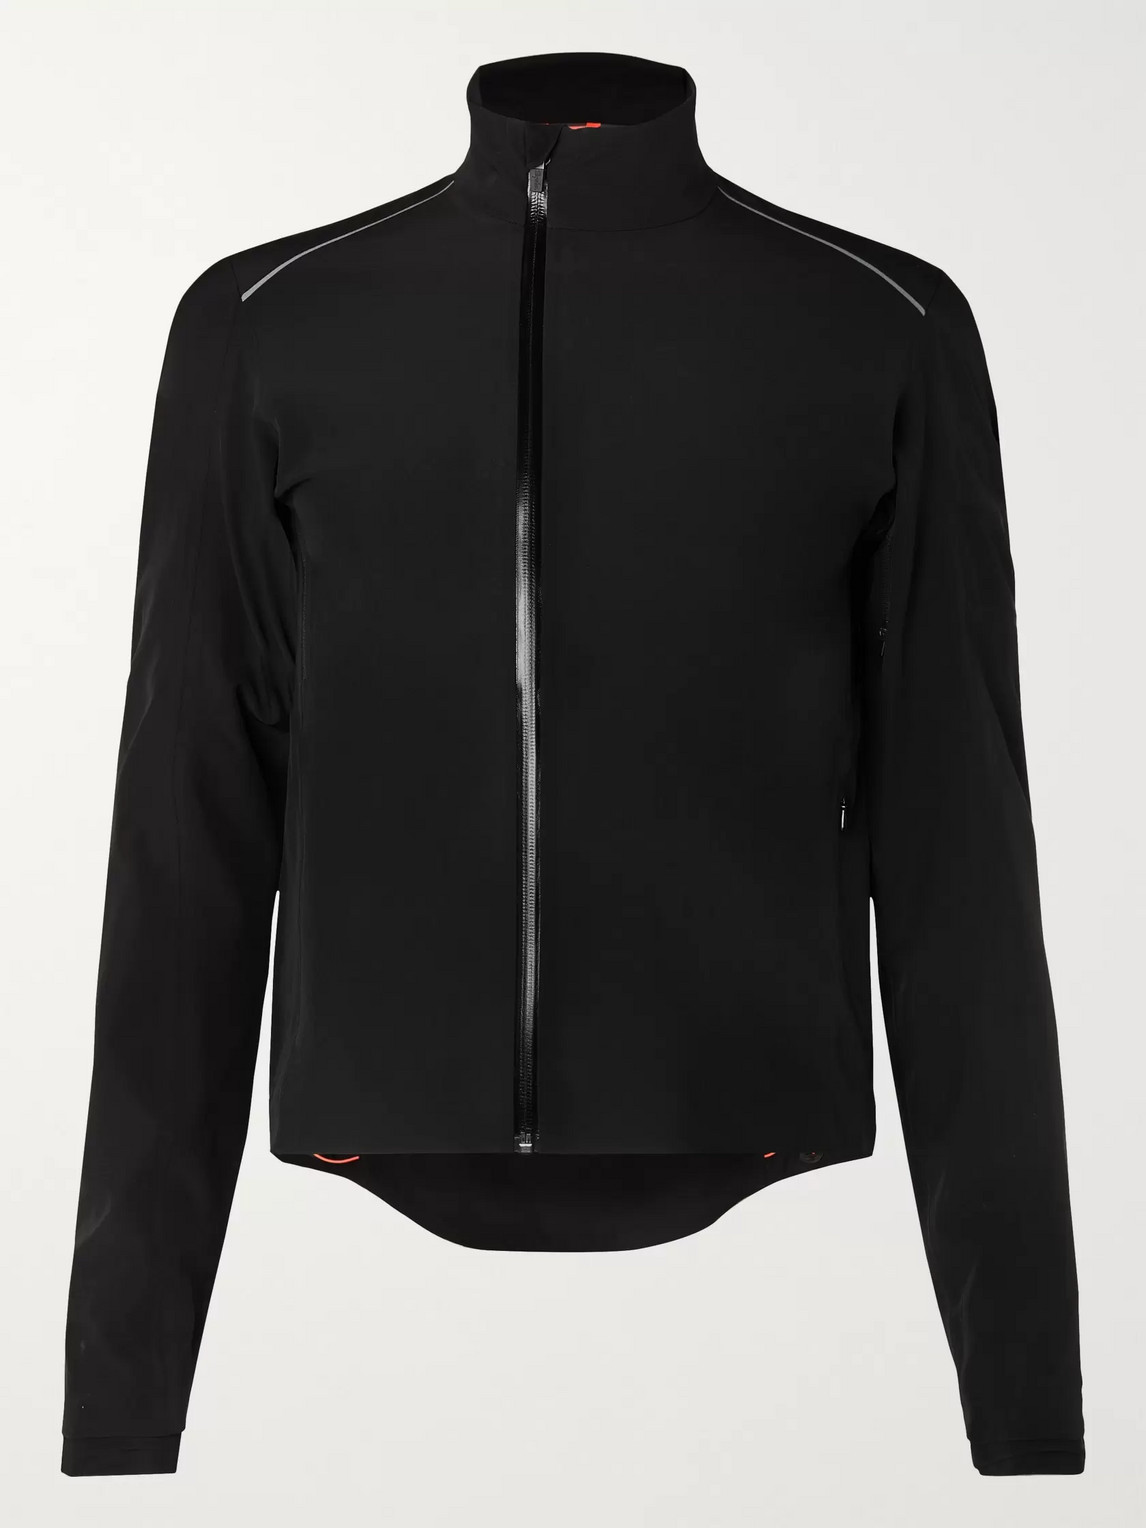 Rapha Classic Winter Cycling Jacket In Black